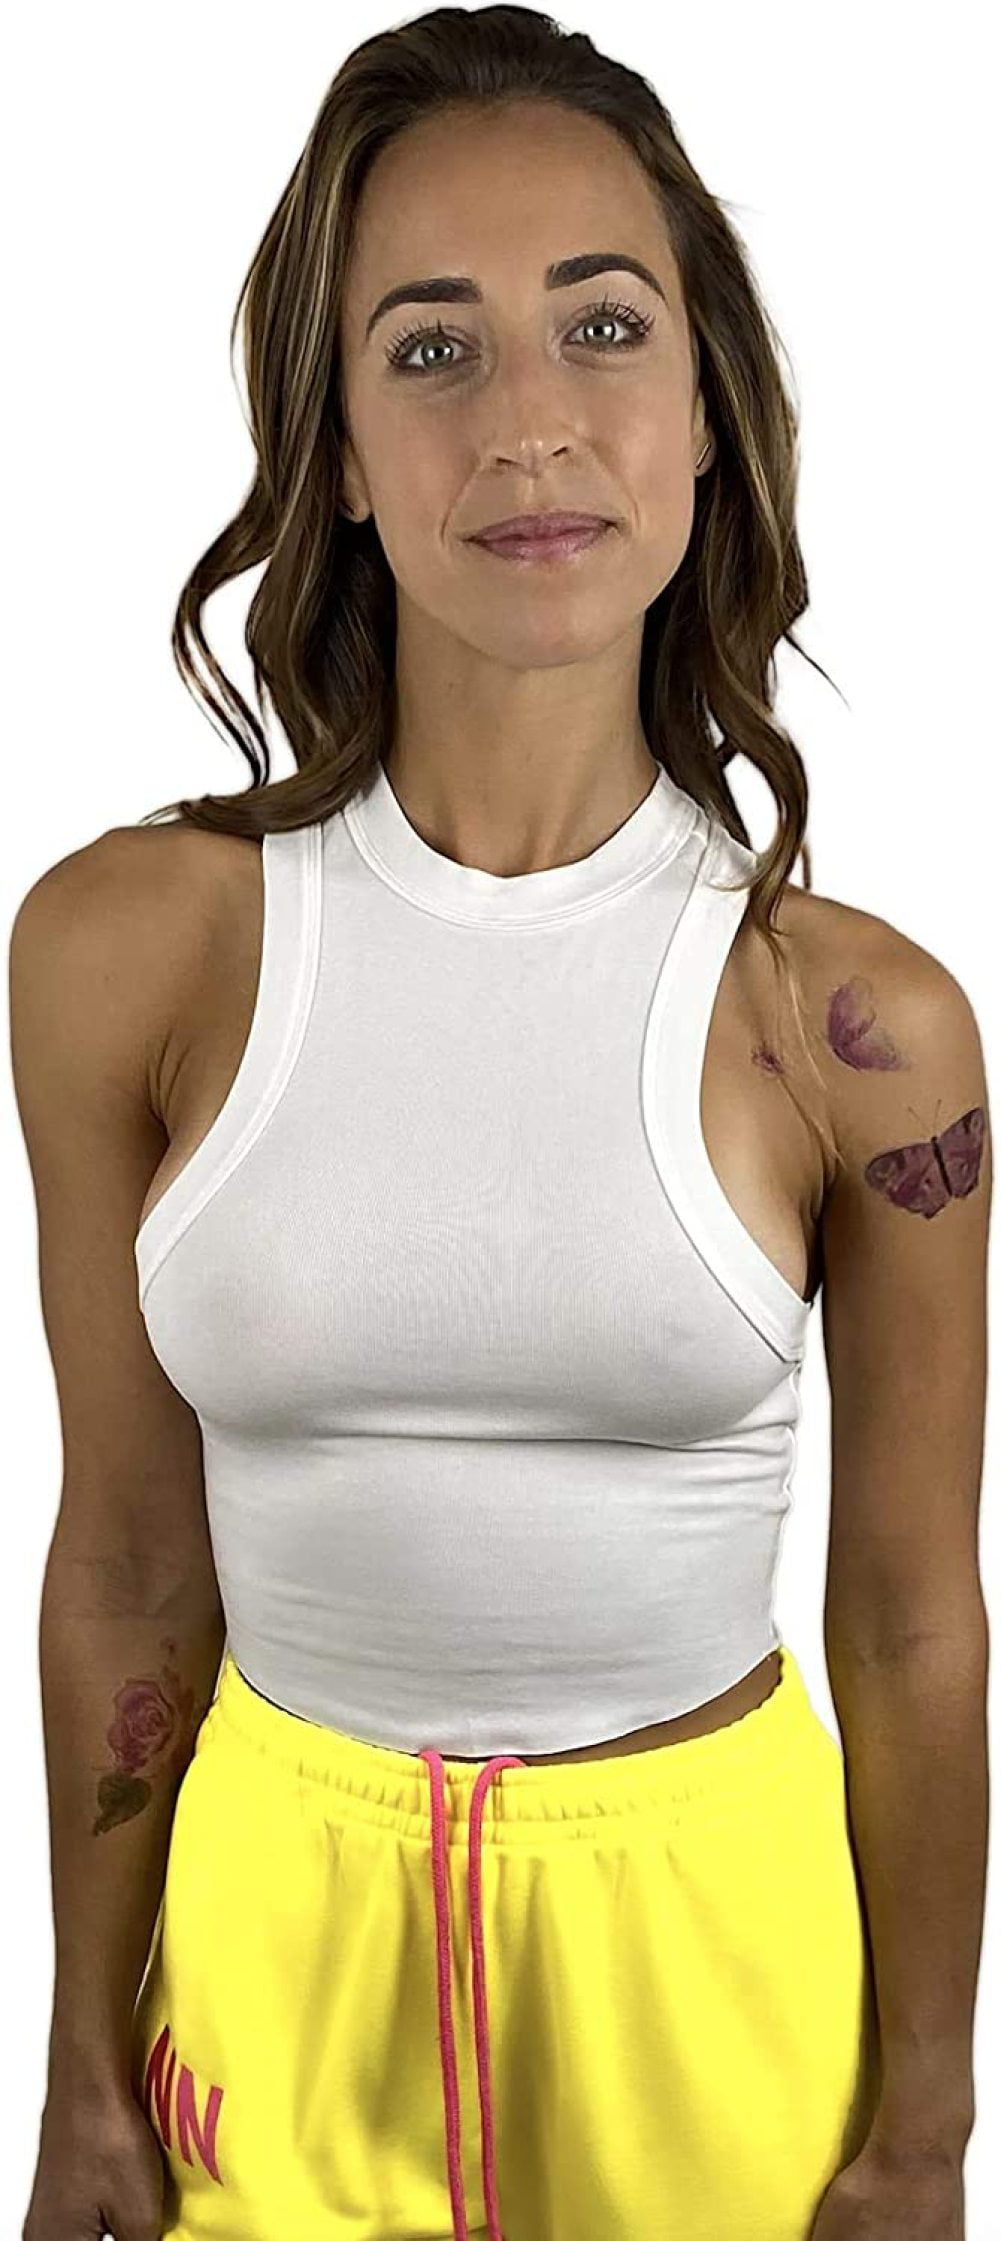 BalyFovin Sexy Side Boob White Tank Crop Top for Party Dates